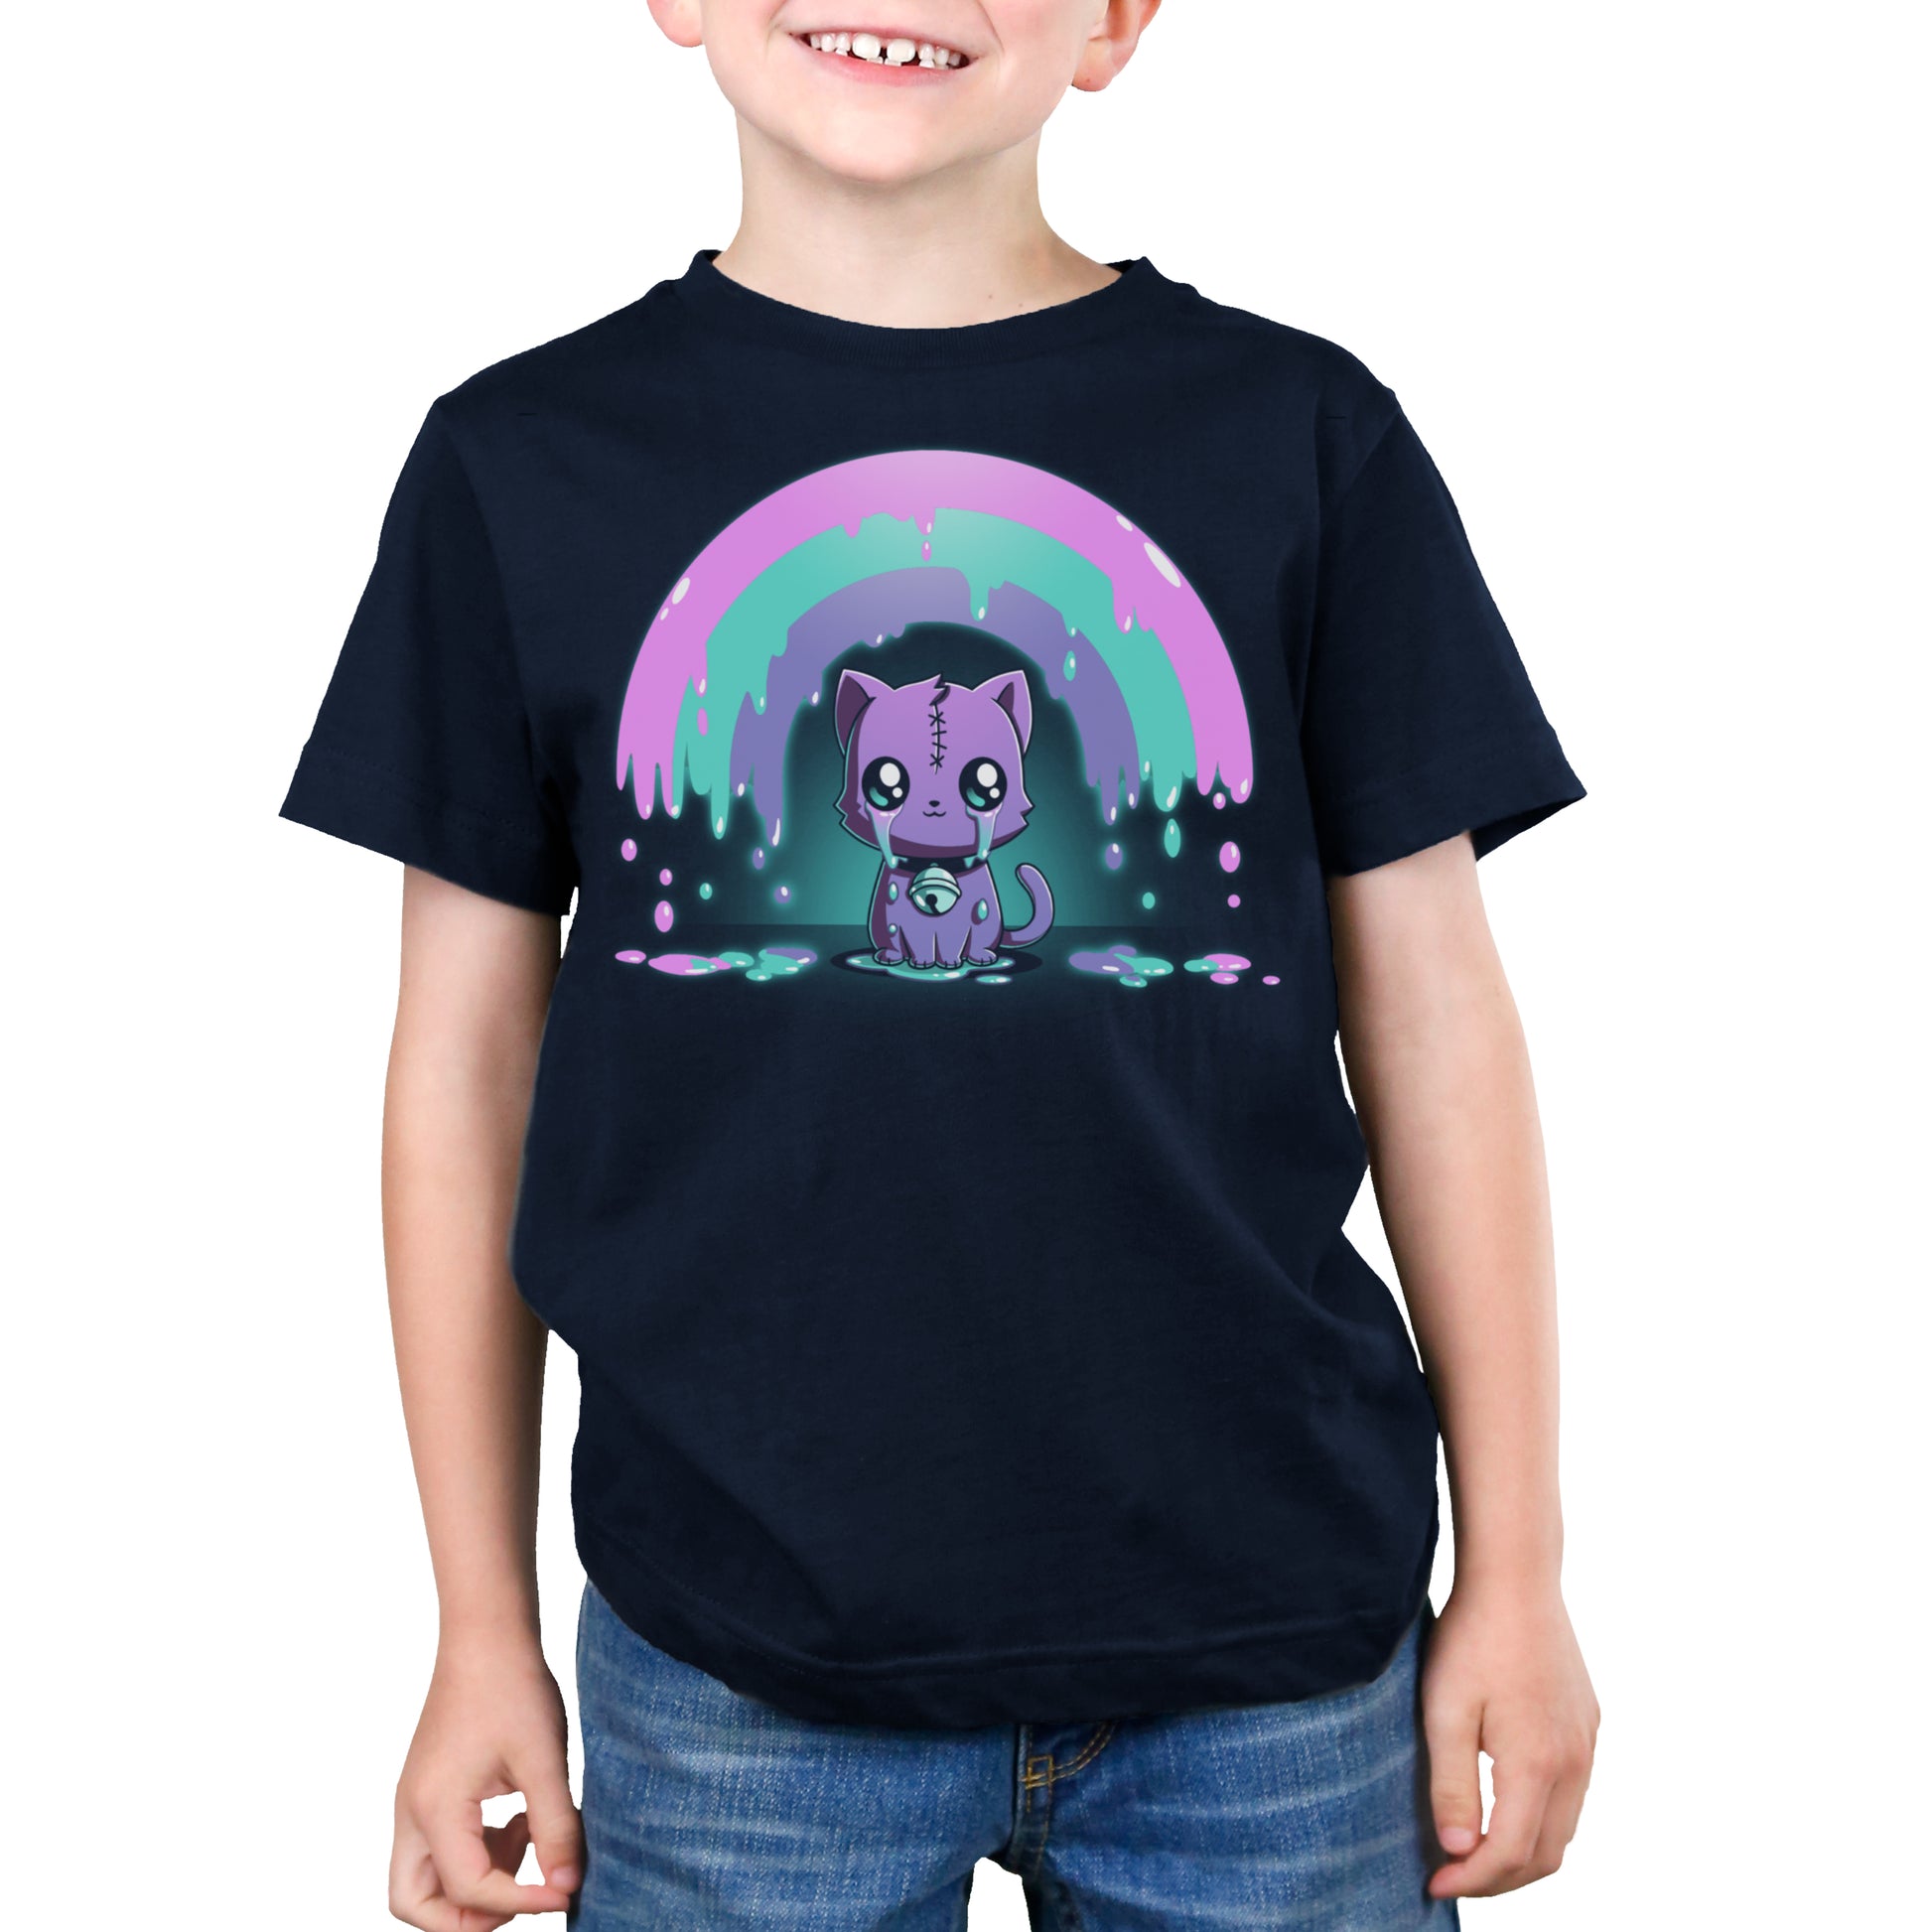 A child is wearing a navy blue, super soft cotton t-shirt with a cute, cartoonish purple cat under a pink and green dripping rainbow design on the front. The Rainbow Crying Cat tee by monsterdigital has the child smiling and their hands by their sides.